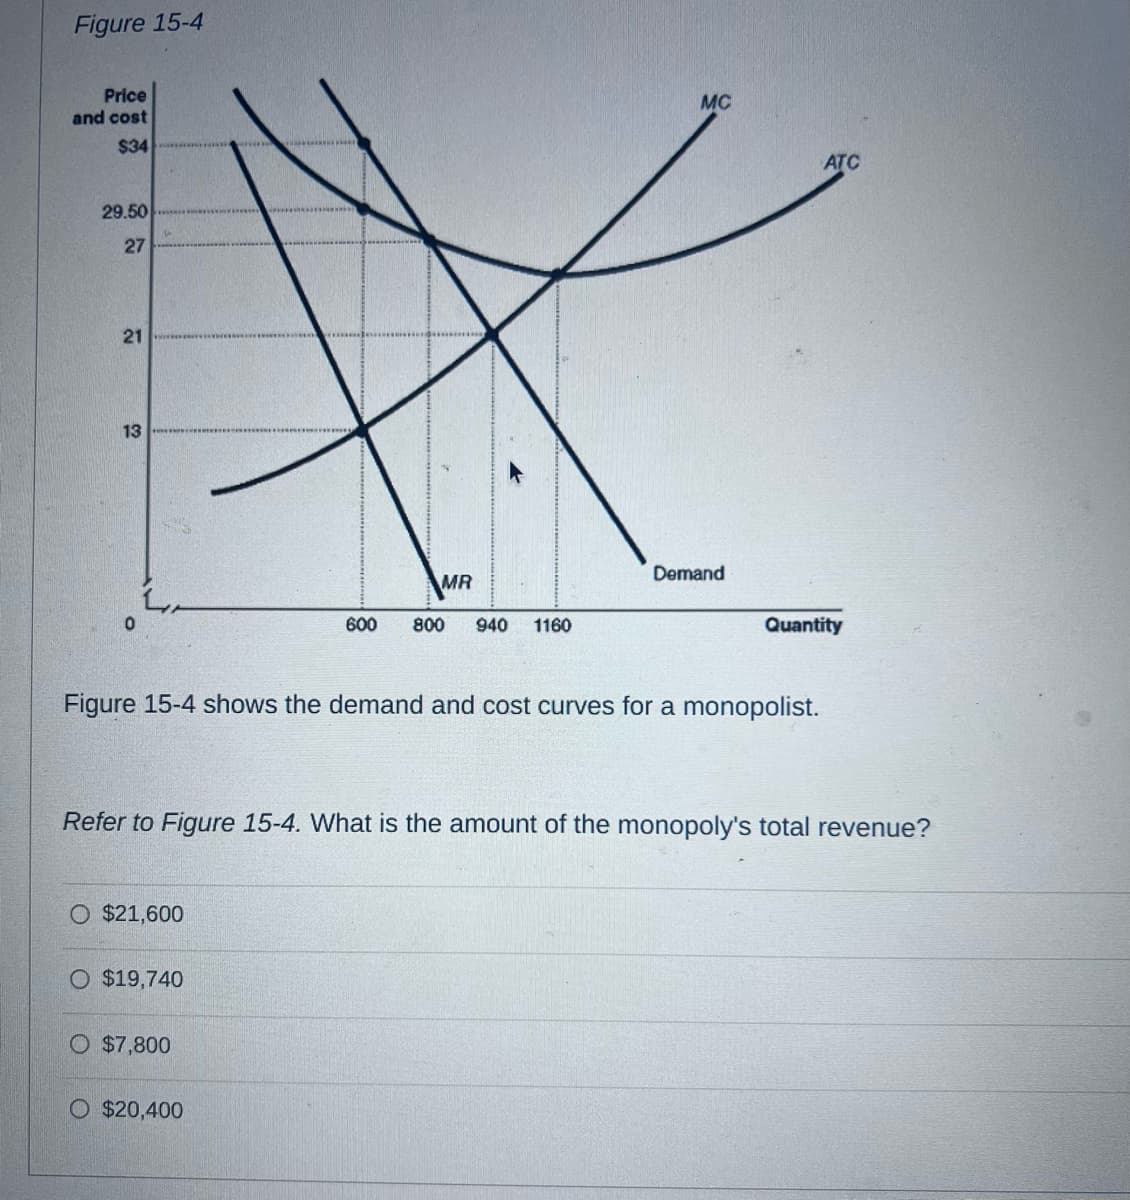 Figure 15-4
Price
and cost
$34
29.50
27
22
21
13
0
MR
600
800 940 1160
MC
ATC
Demand
Quantity
Figure 15-4 shows the demand and cost curves for a monopolist.
Refer to Figure 15-4. What is the amount of the monopoly's total revenue?
$21,600
O $19,740
O $7,800
O $20,400